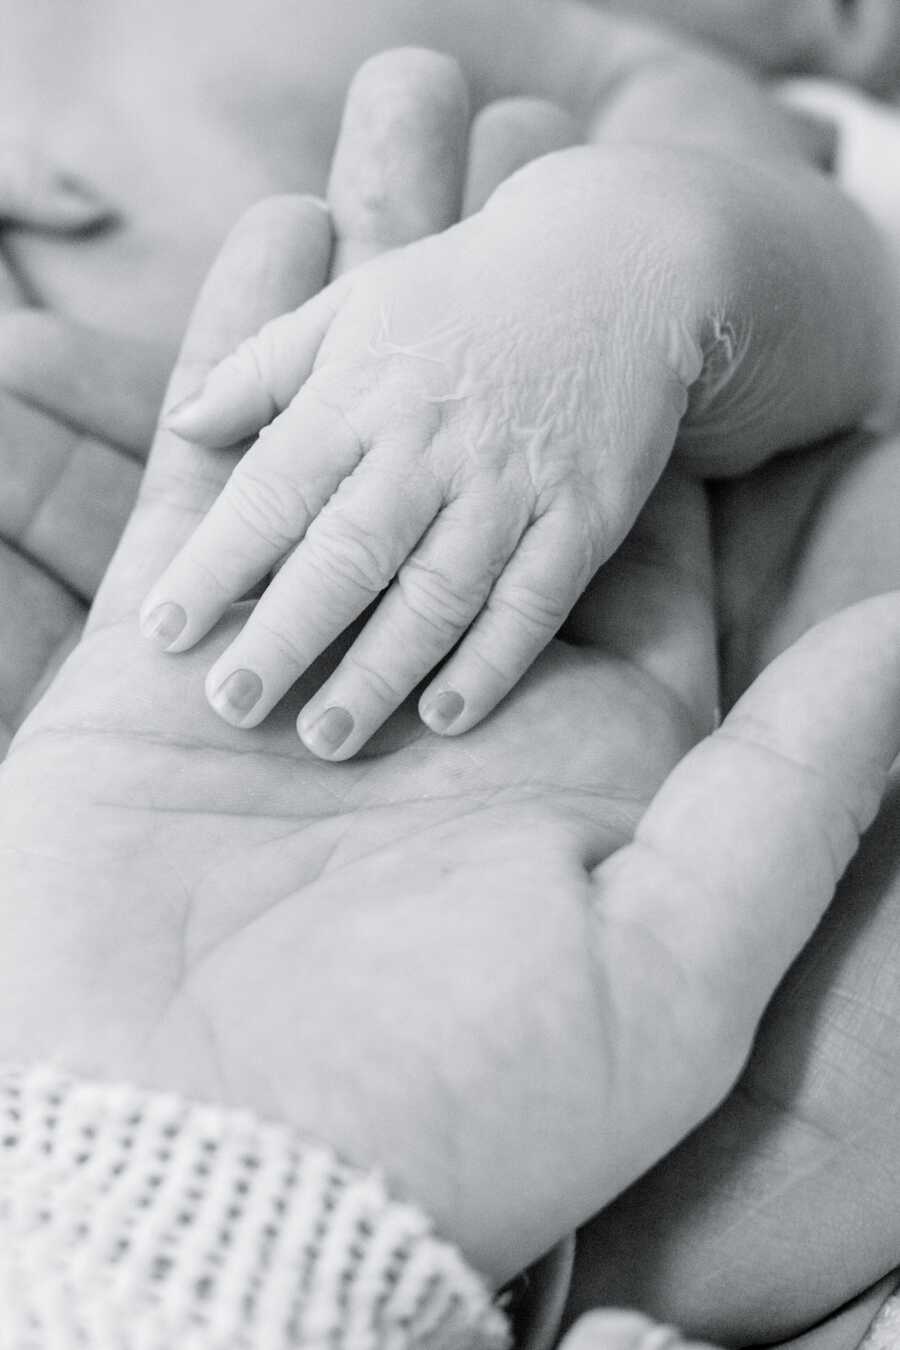 A baby's hand resting inside the hand of her mother